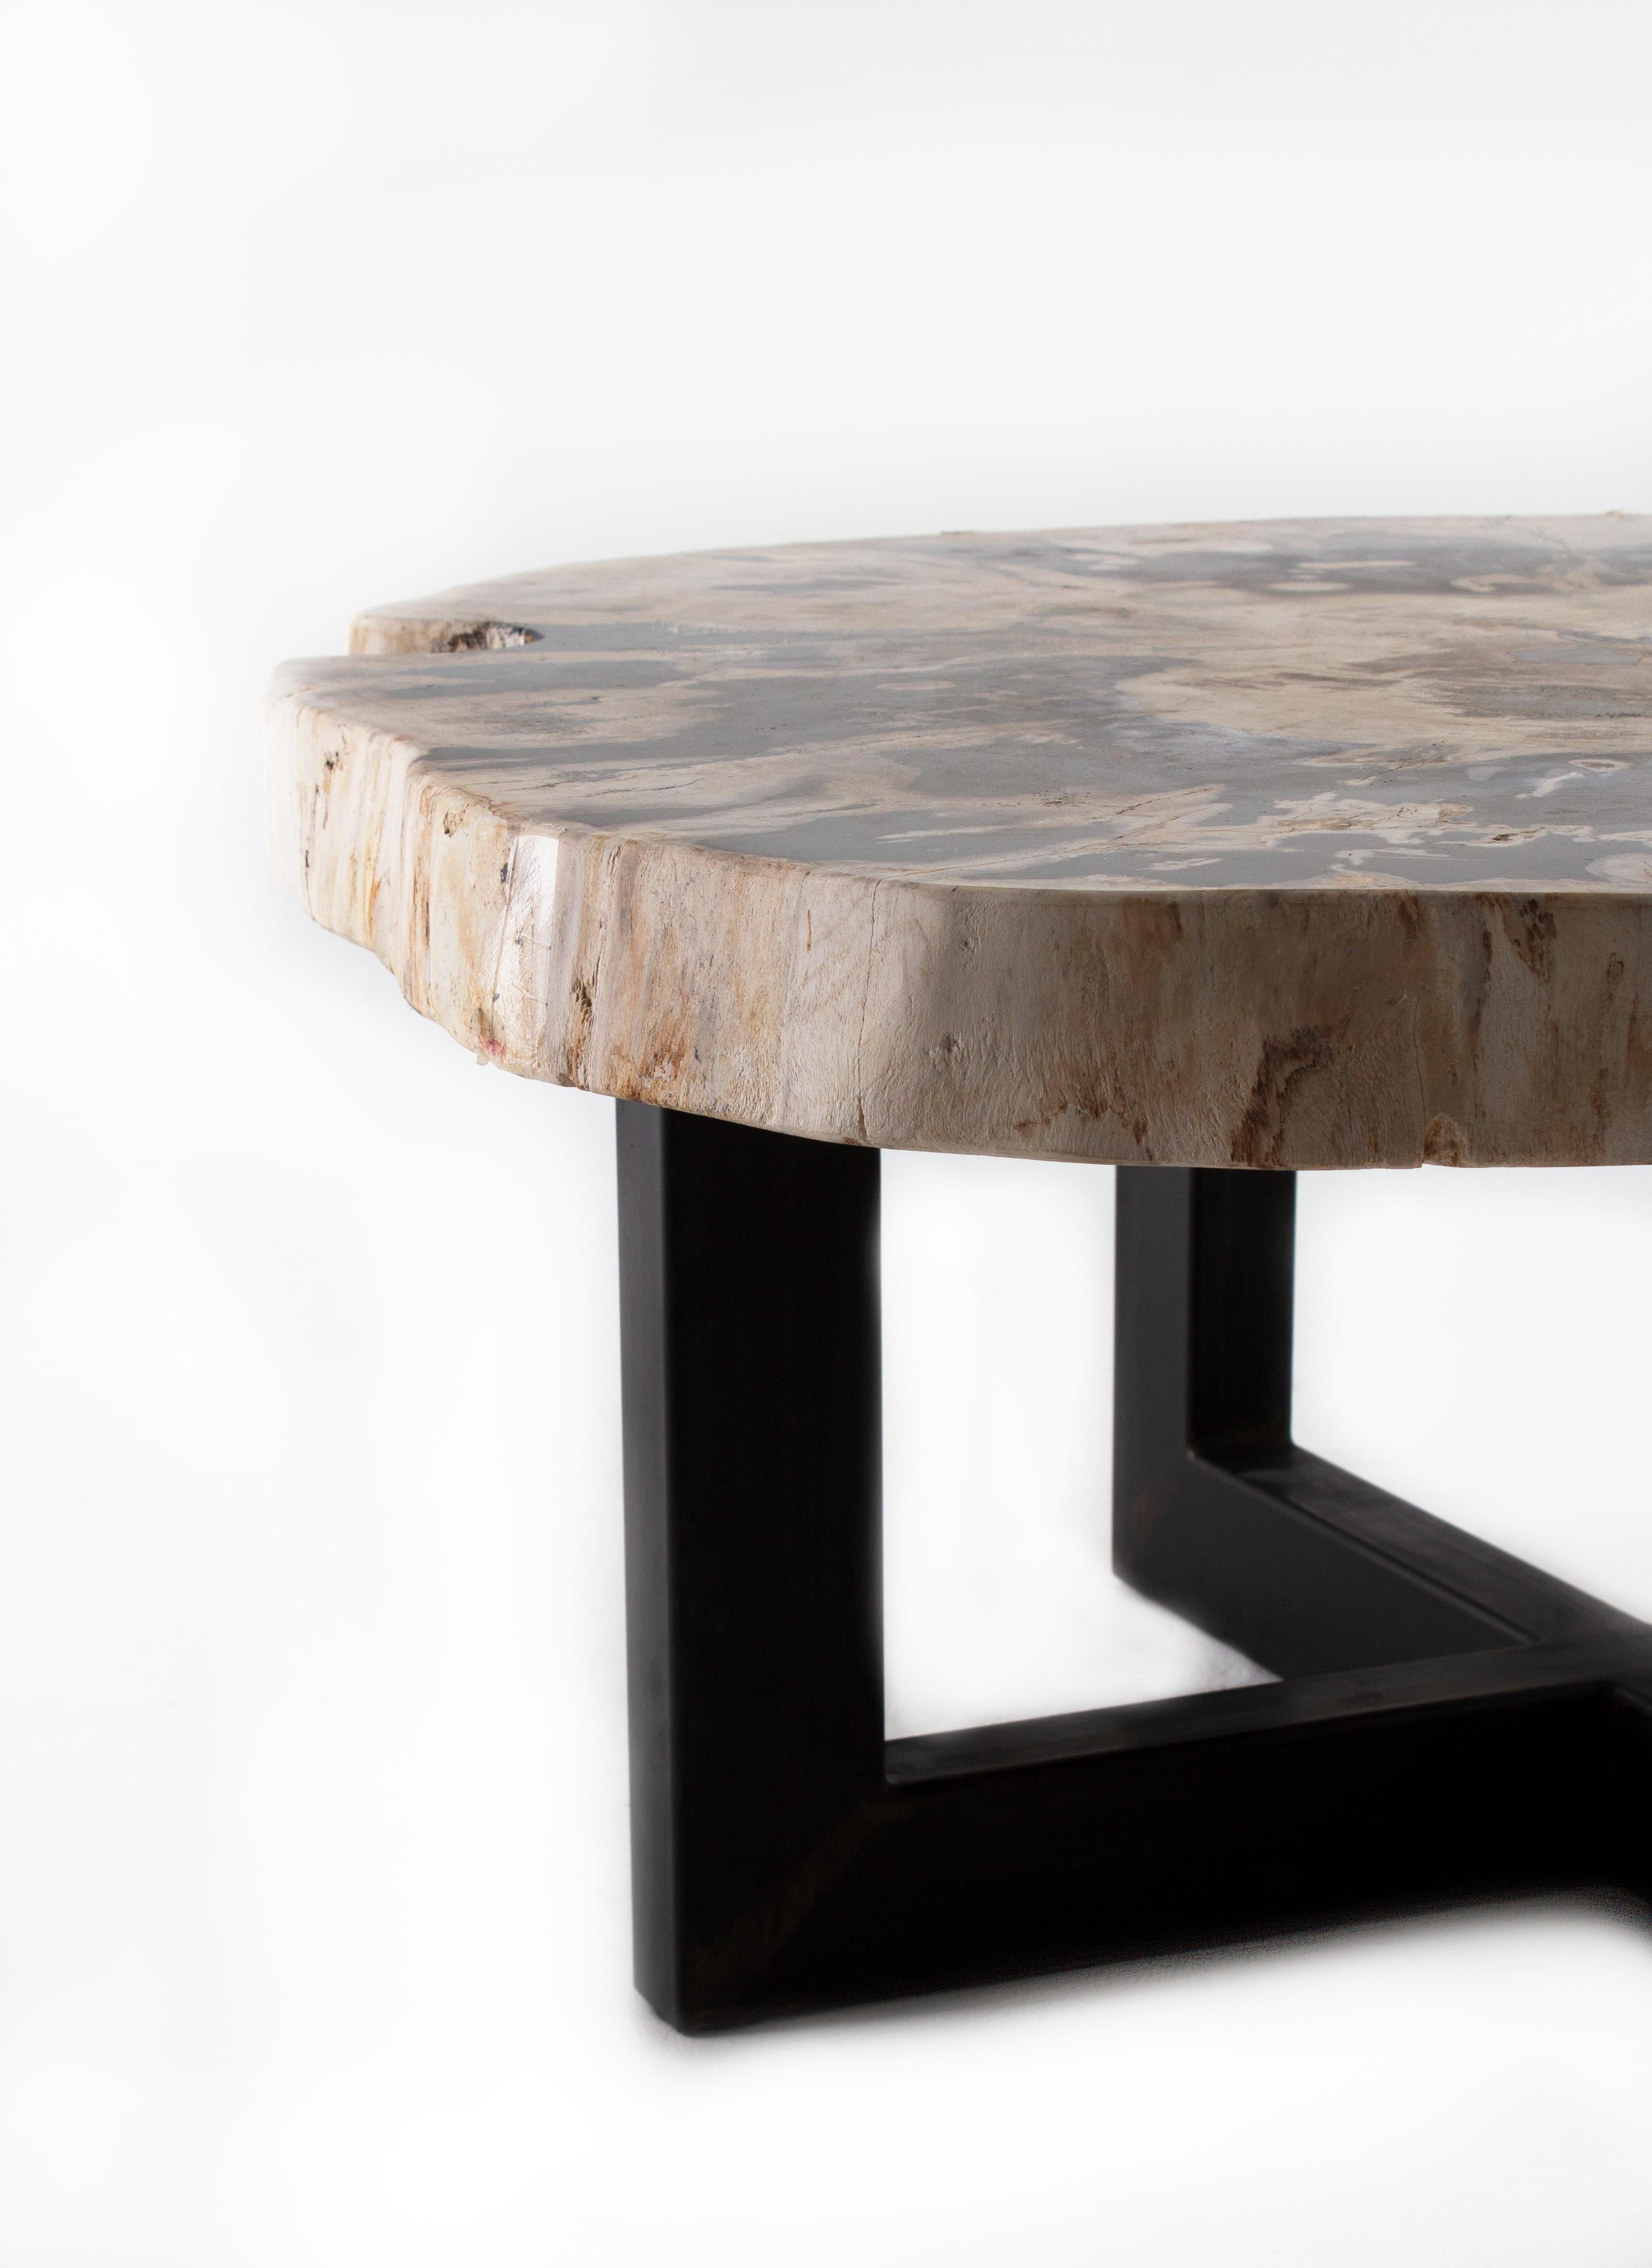 South Asian Petrified Wood Coffee Table on Black Steel Mount